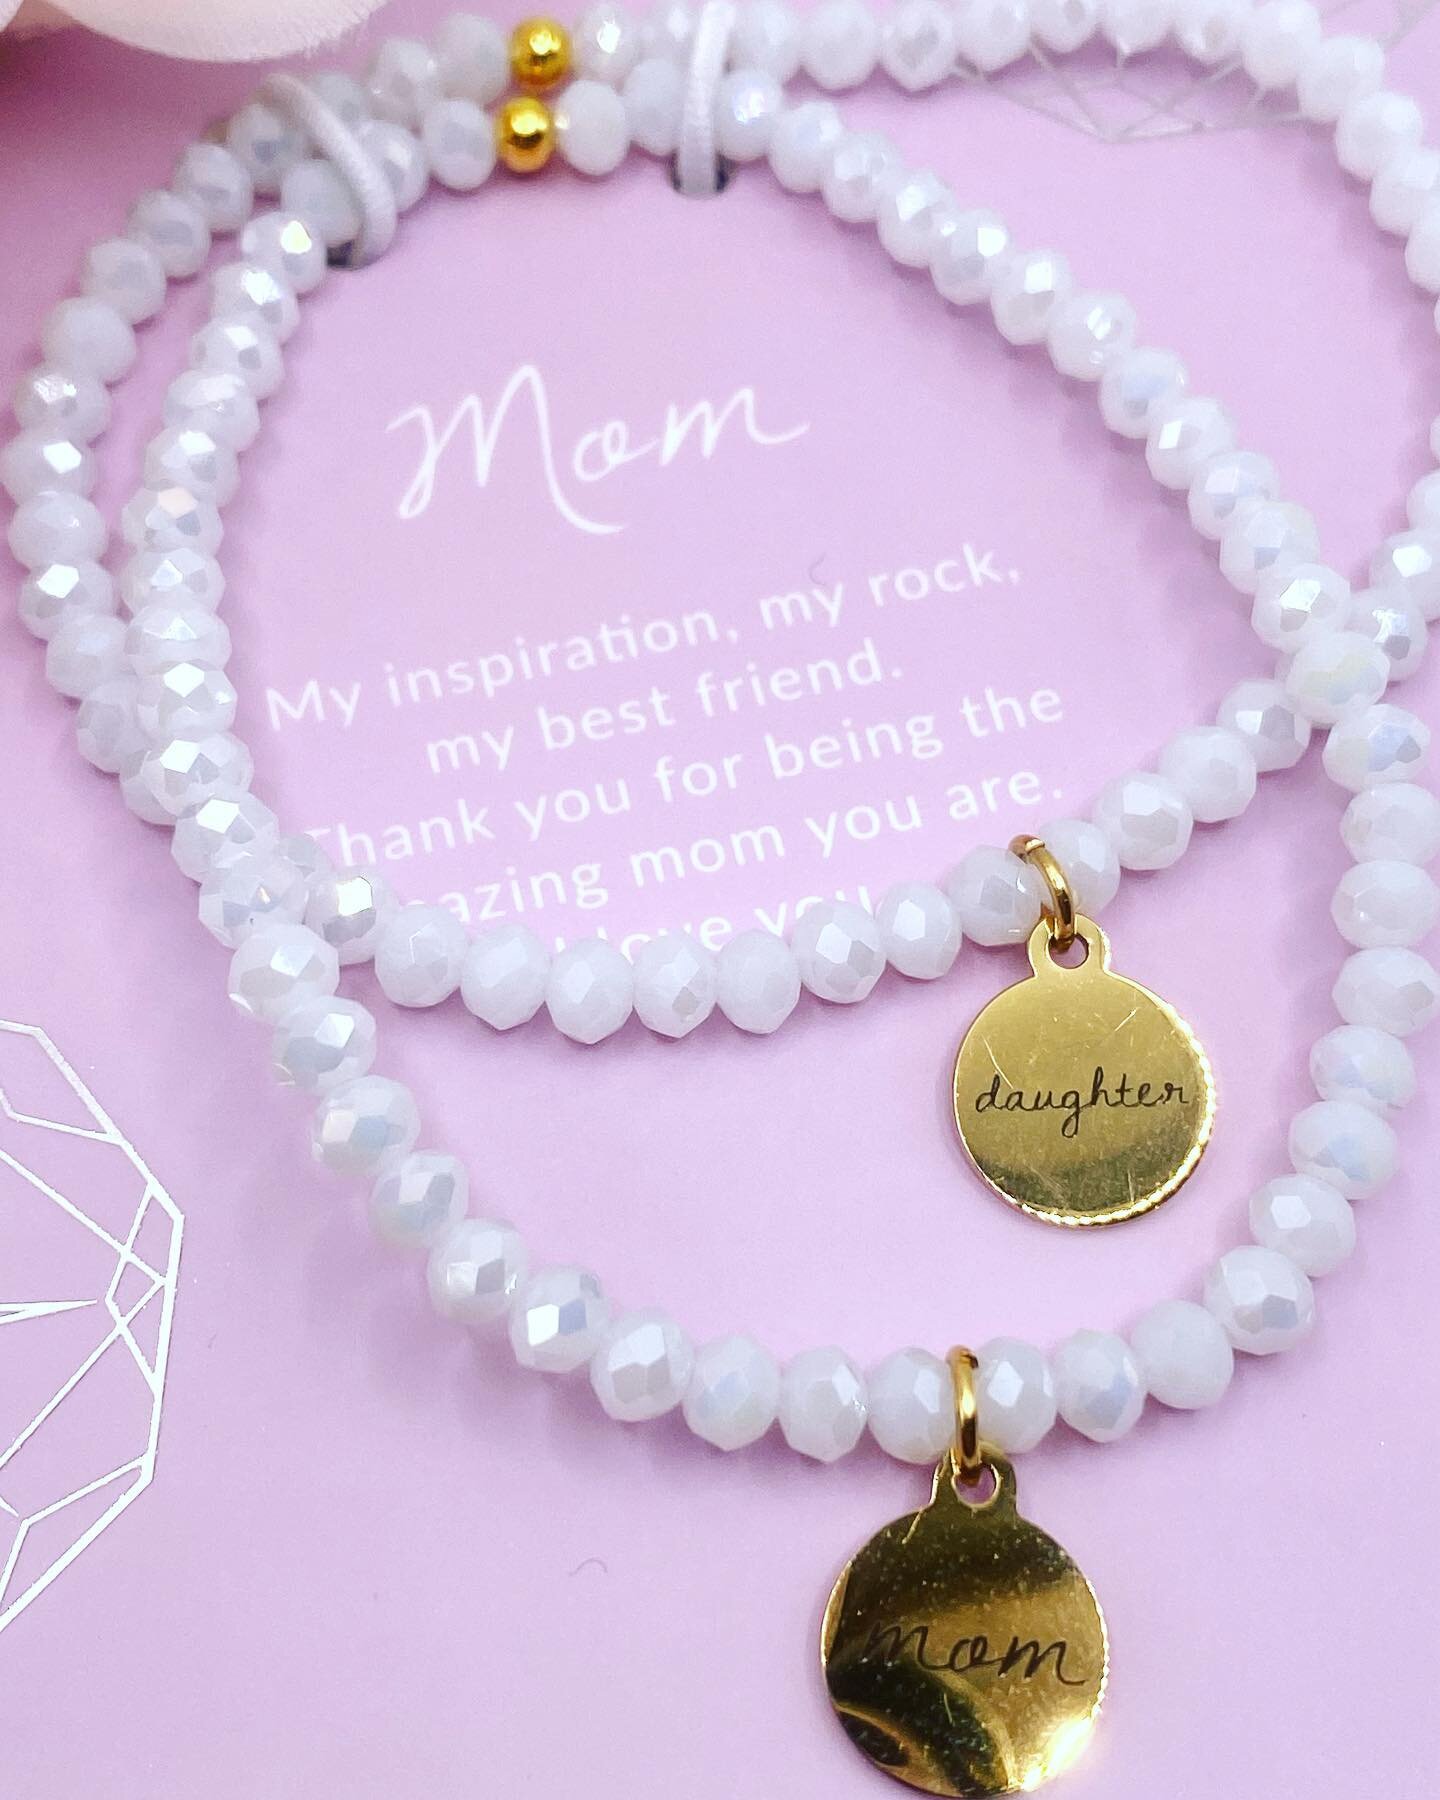 One for you (the best daughter) and one for her (the most amazing Mom) 💖💖 #mothersday #mom #daughter #motherdaughter #motherdaughterlove #shoplocal #shopsmall #shopdtw #shopcle